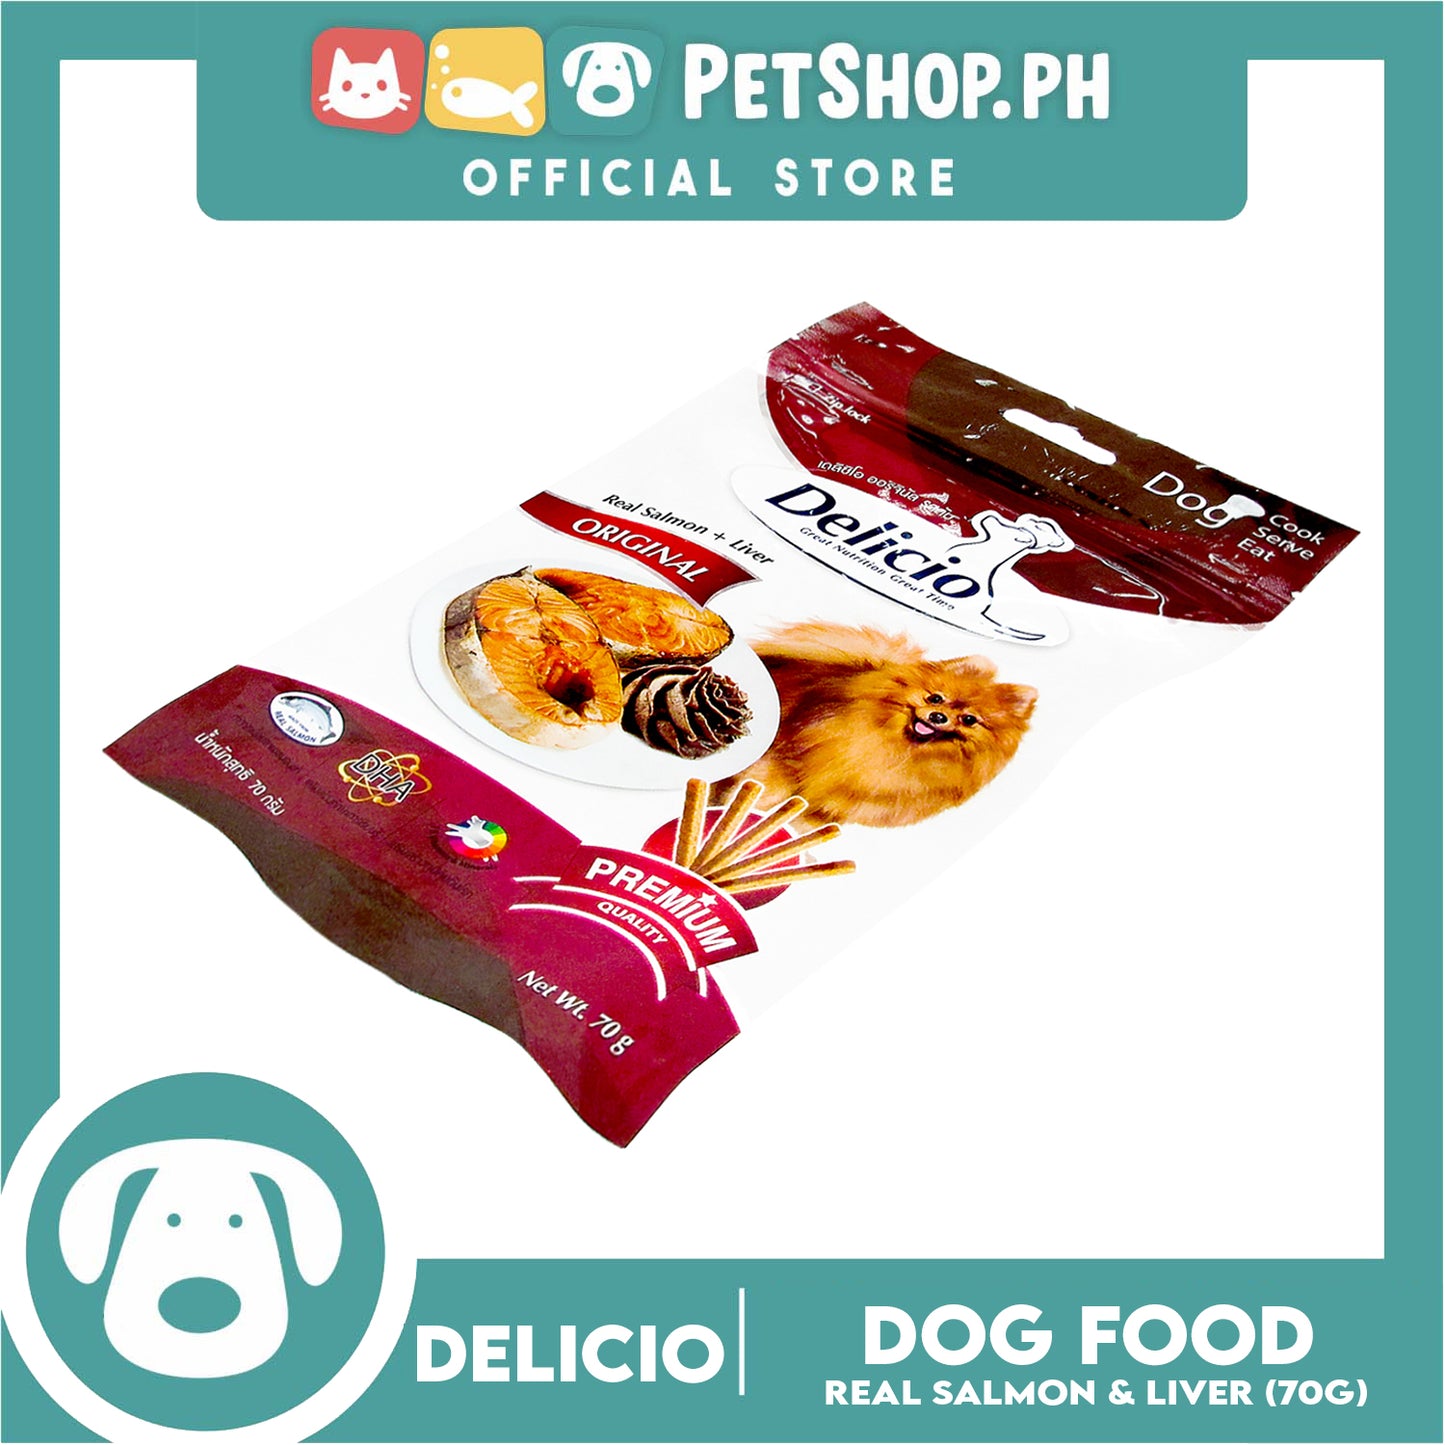 Delicio Original Great Nutrition Great Time 70g (Real Salmon + Liver) Dog Food, Dog Treats, Dog Snack